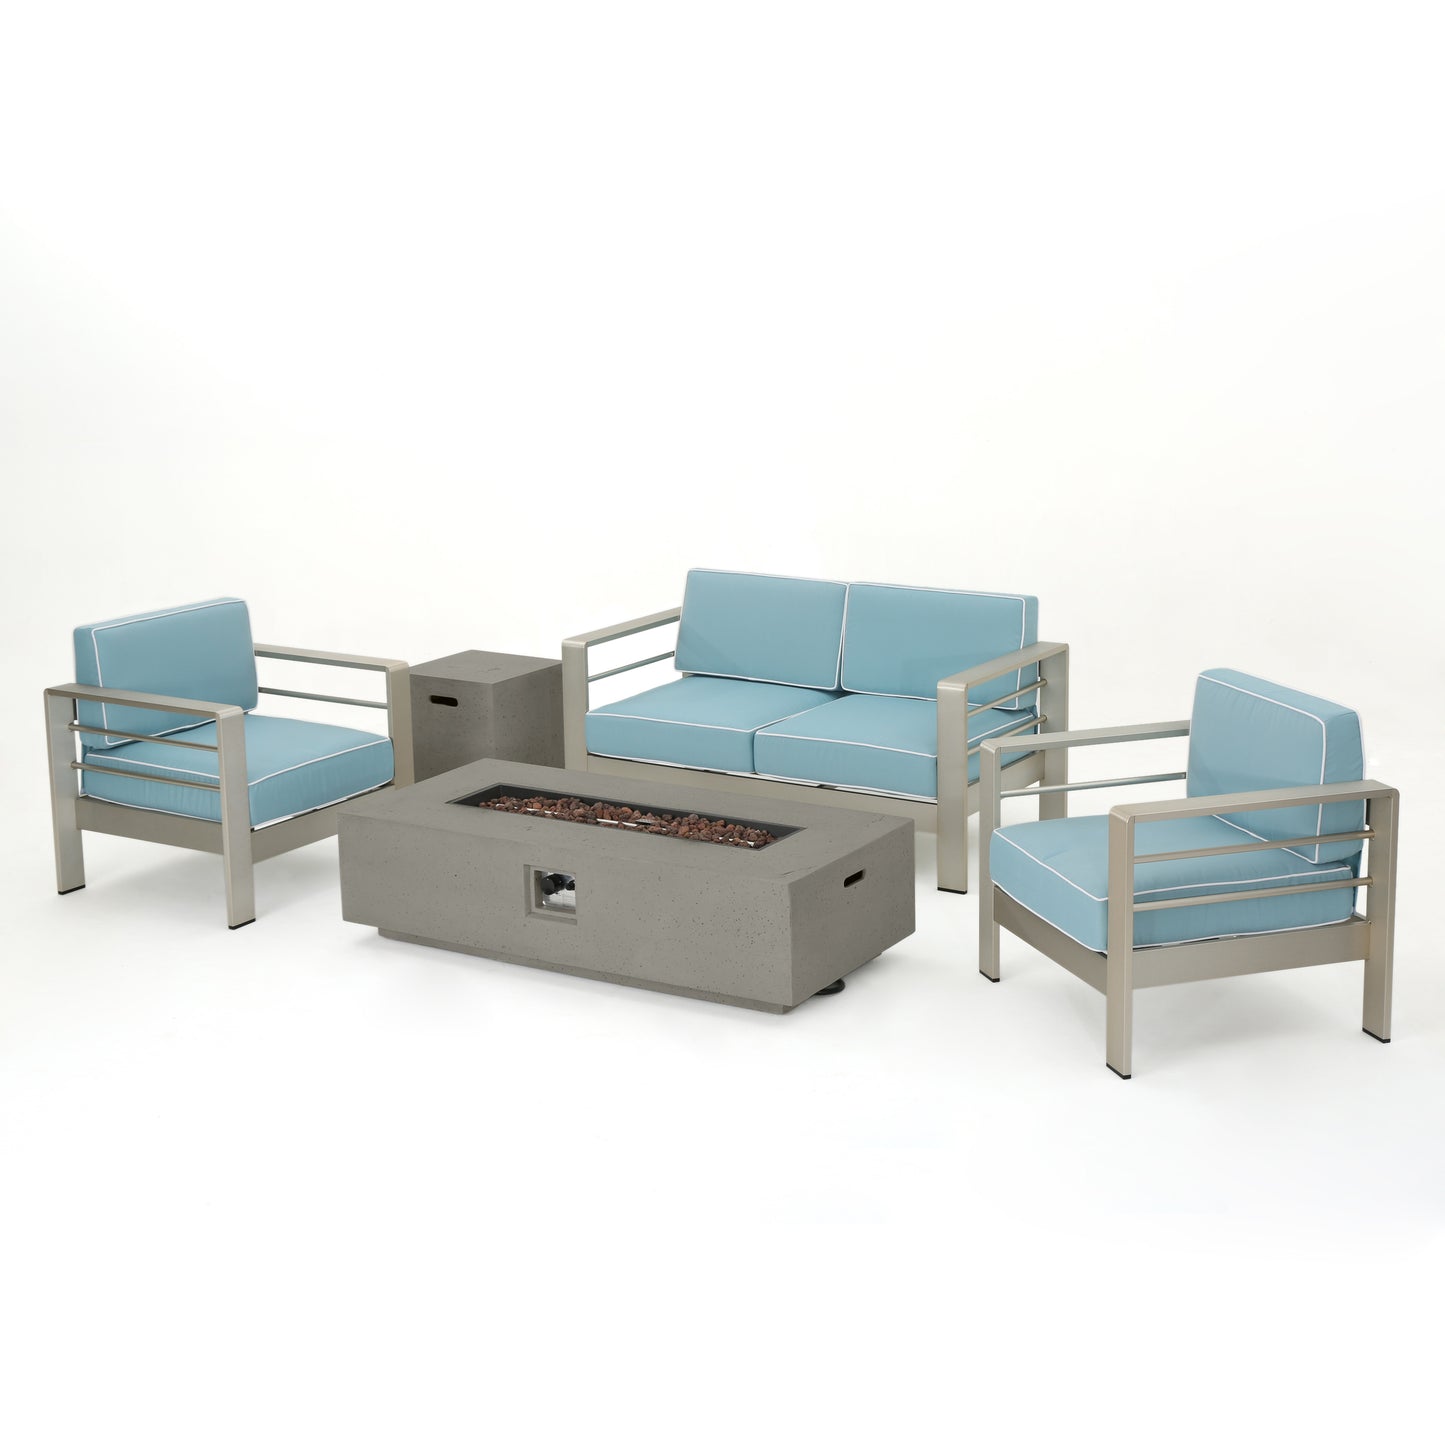 Crested Bay 5 Piece Aluminum Chat Set with Water Resistant Cushions and Fire Pit